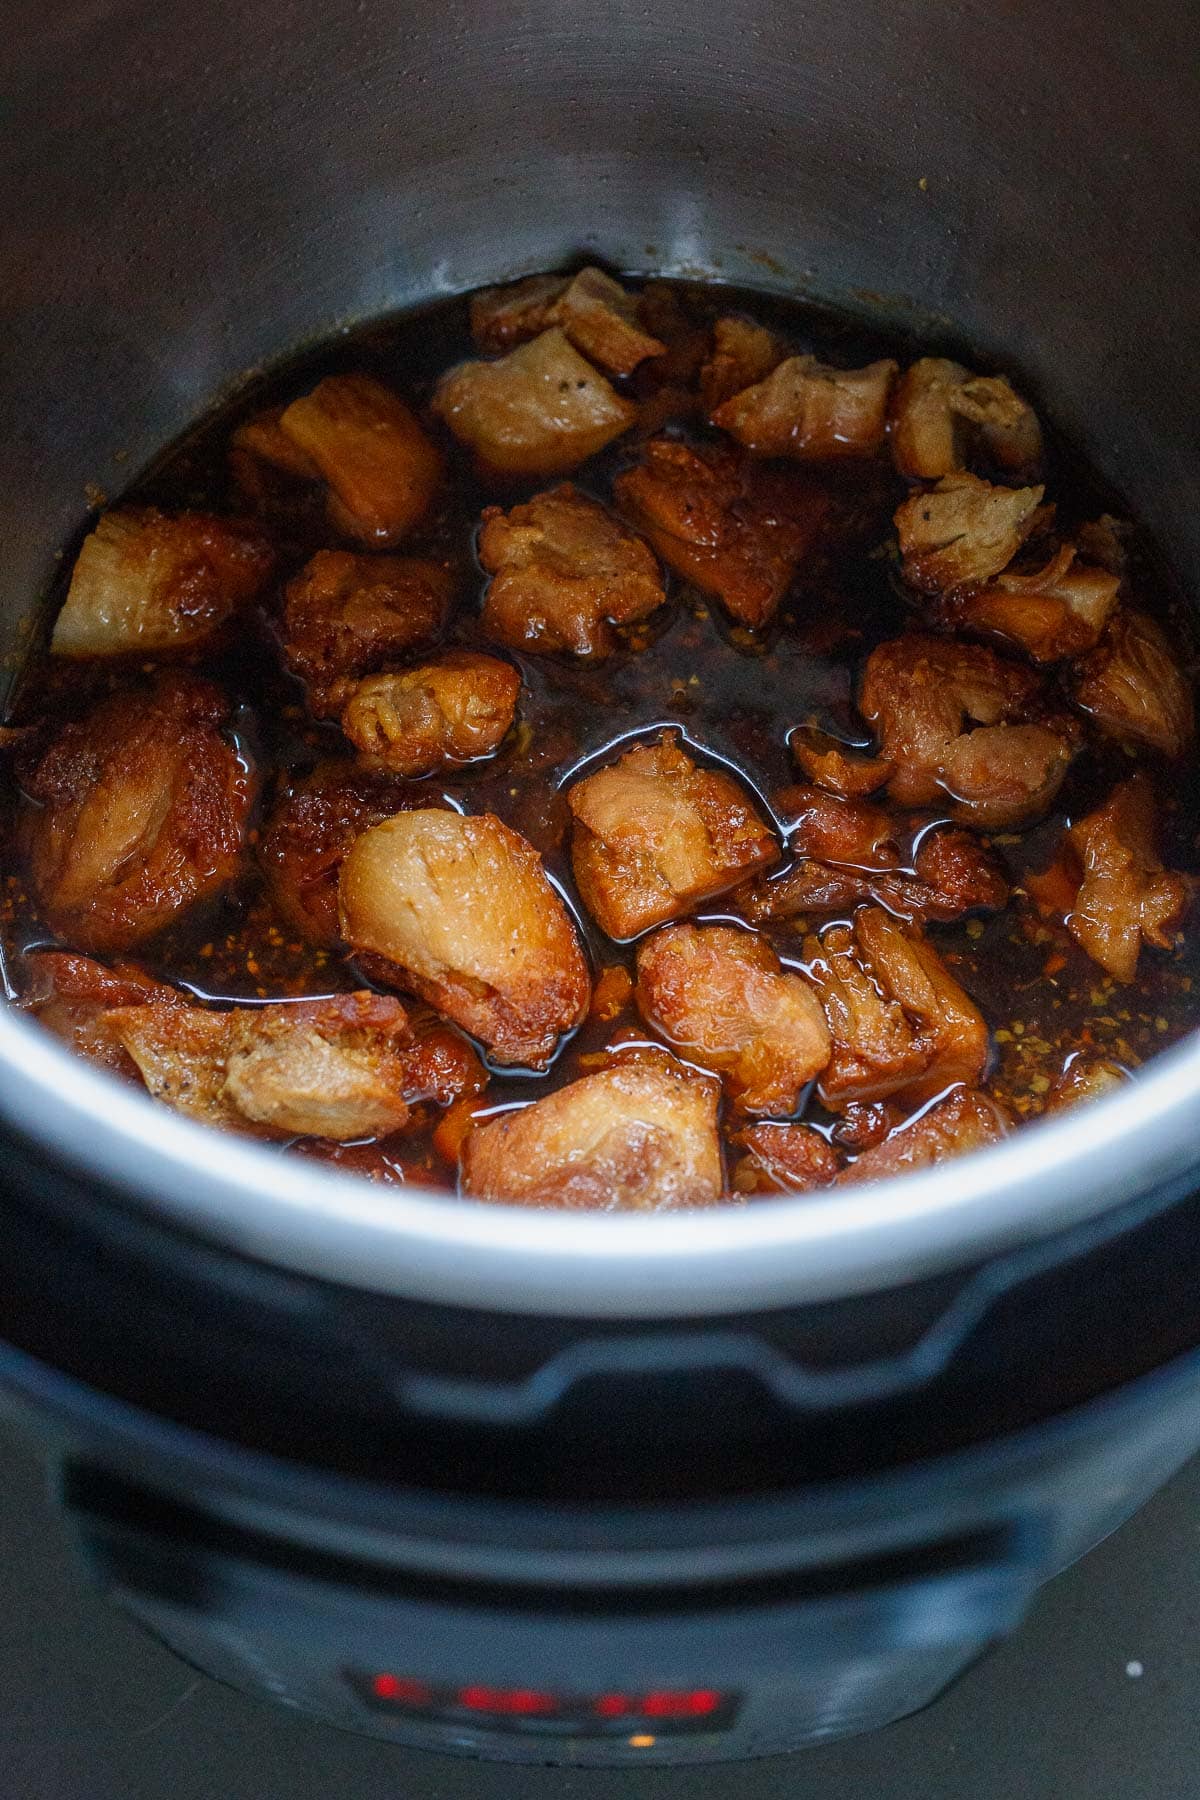 cubed and seared chicken in instant pot with teriyaki sauce.